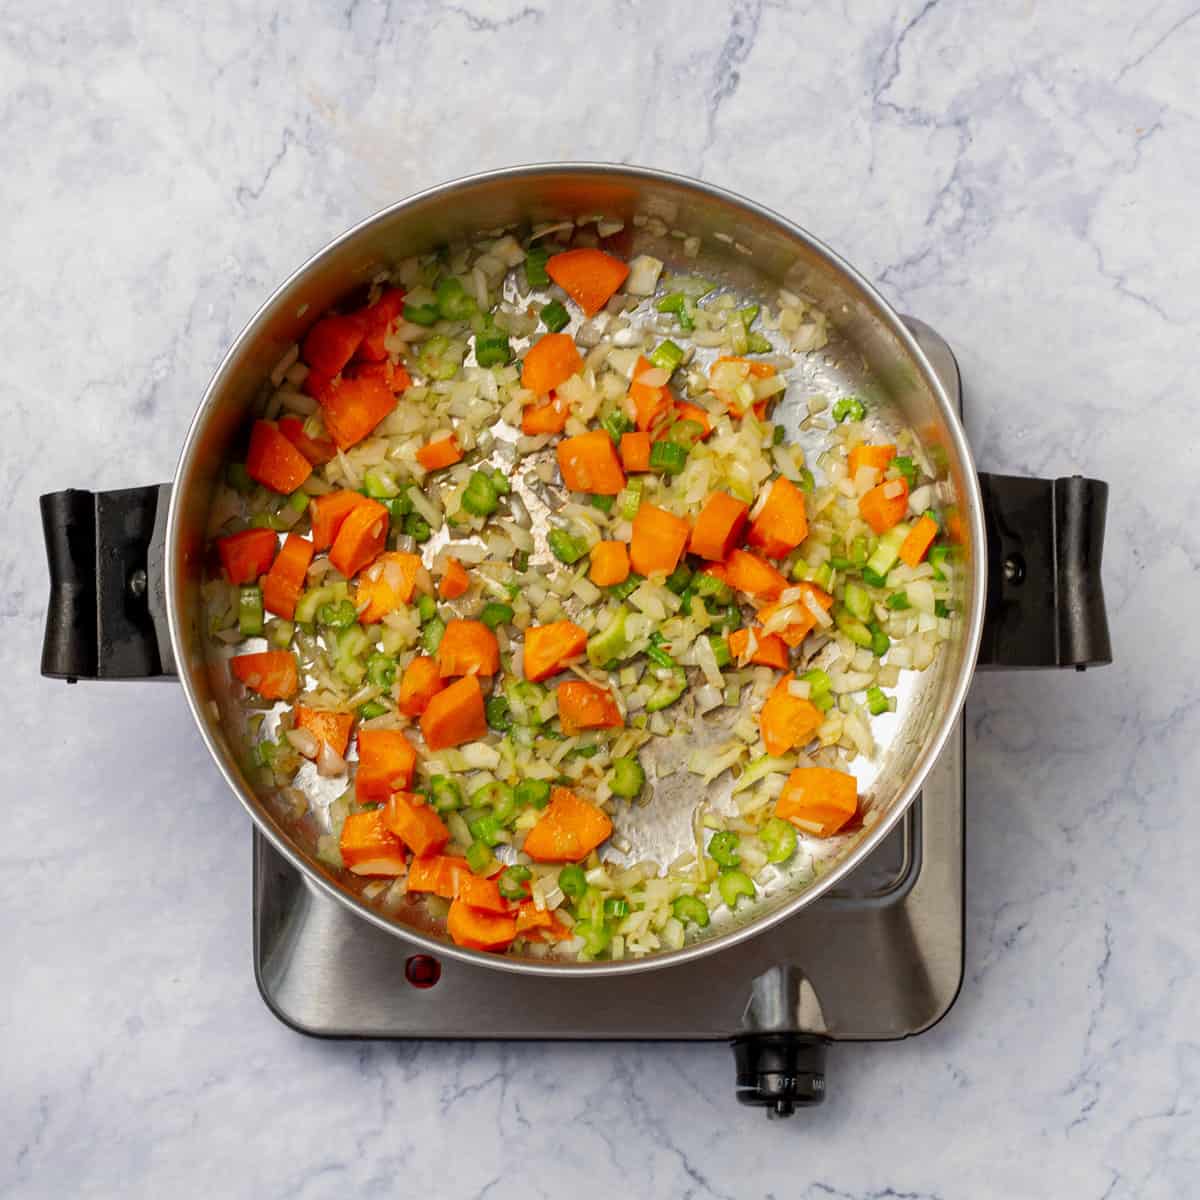 Carrots, celery, and onion sautéeing in a pan.